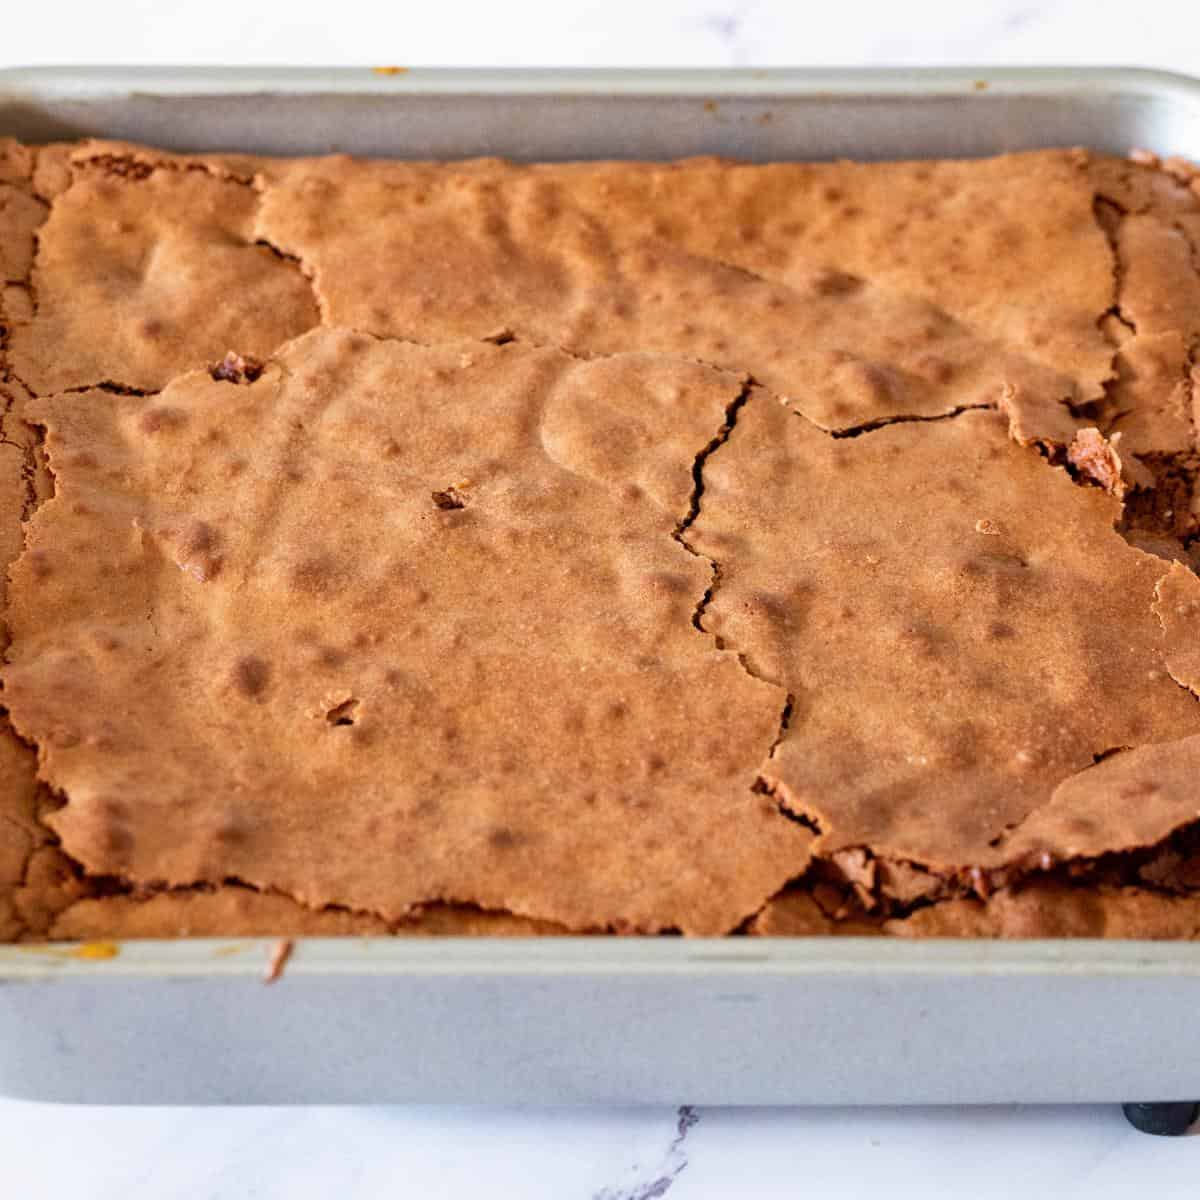 A baking pan with brownies.